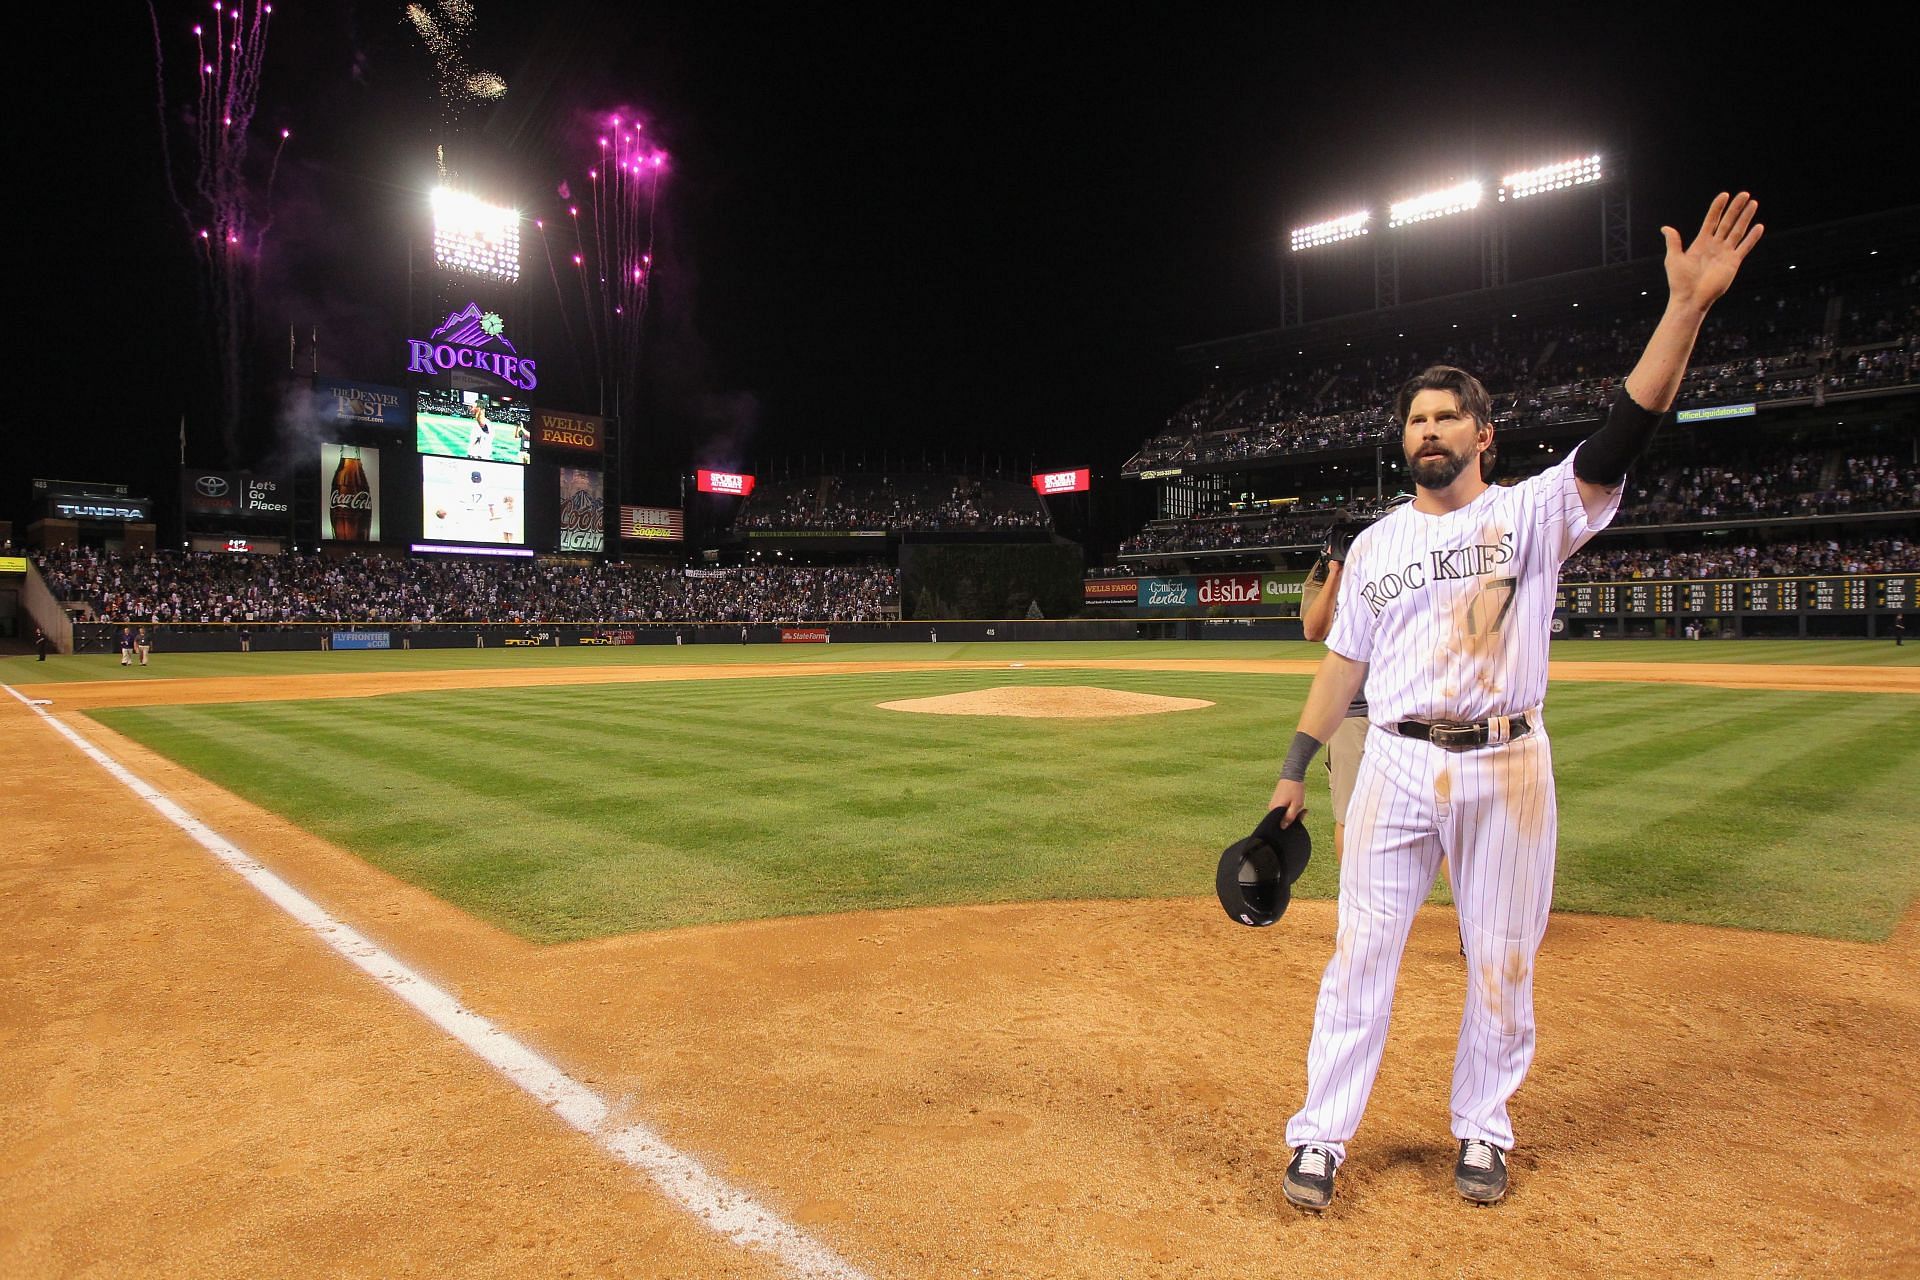 Rockies legend Todd Helton not elected to hall of fame, but inching